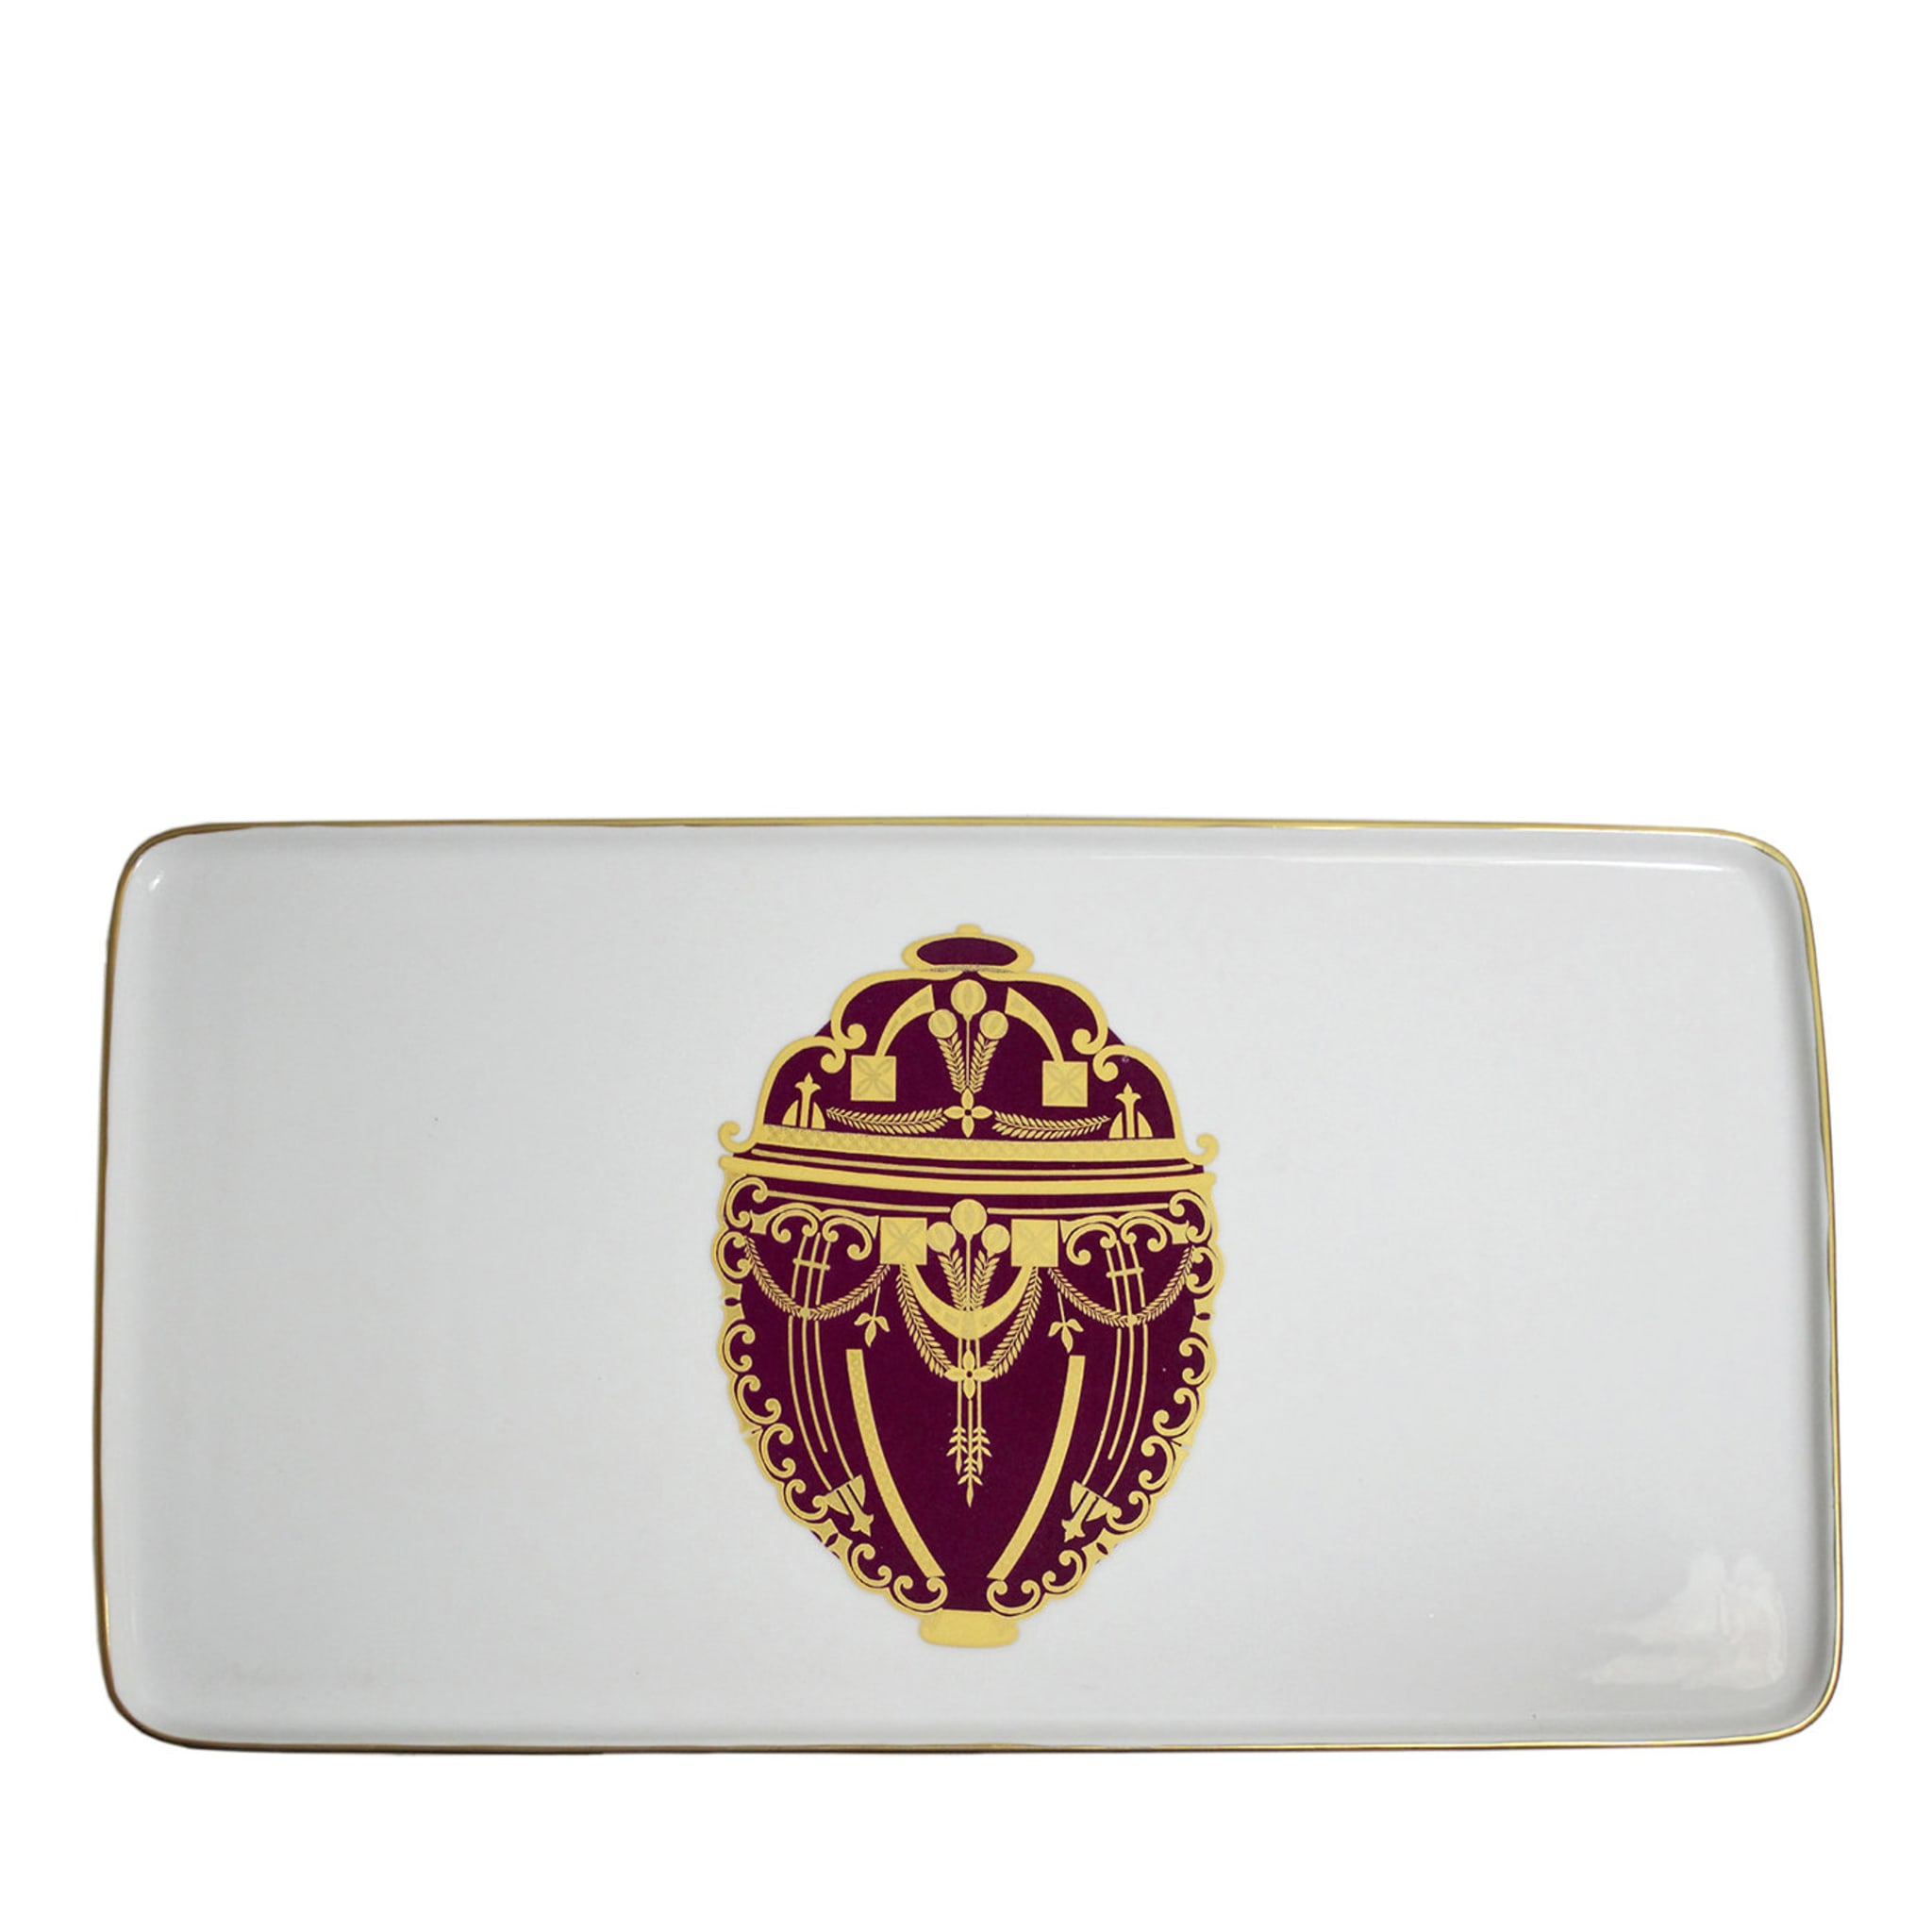 UOVO Bordeaux Tray - Set of 2 - Main view